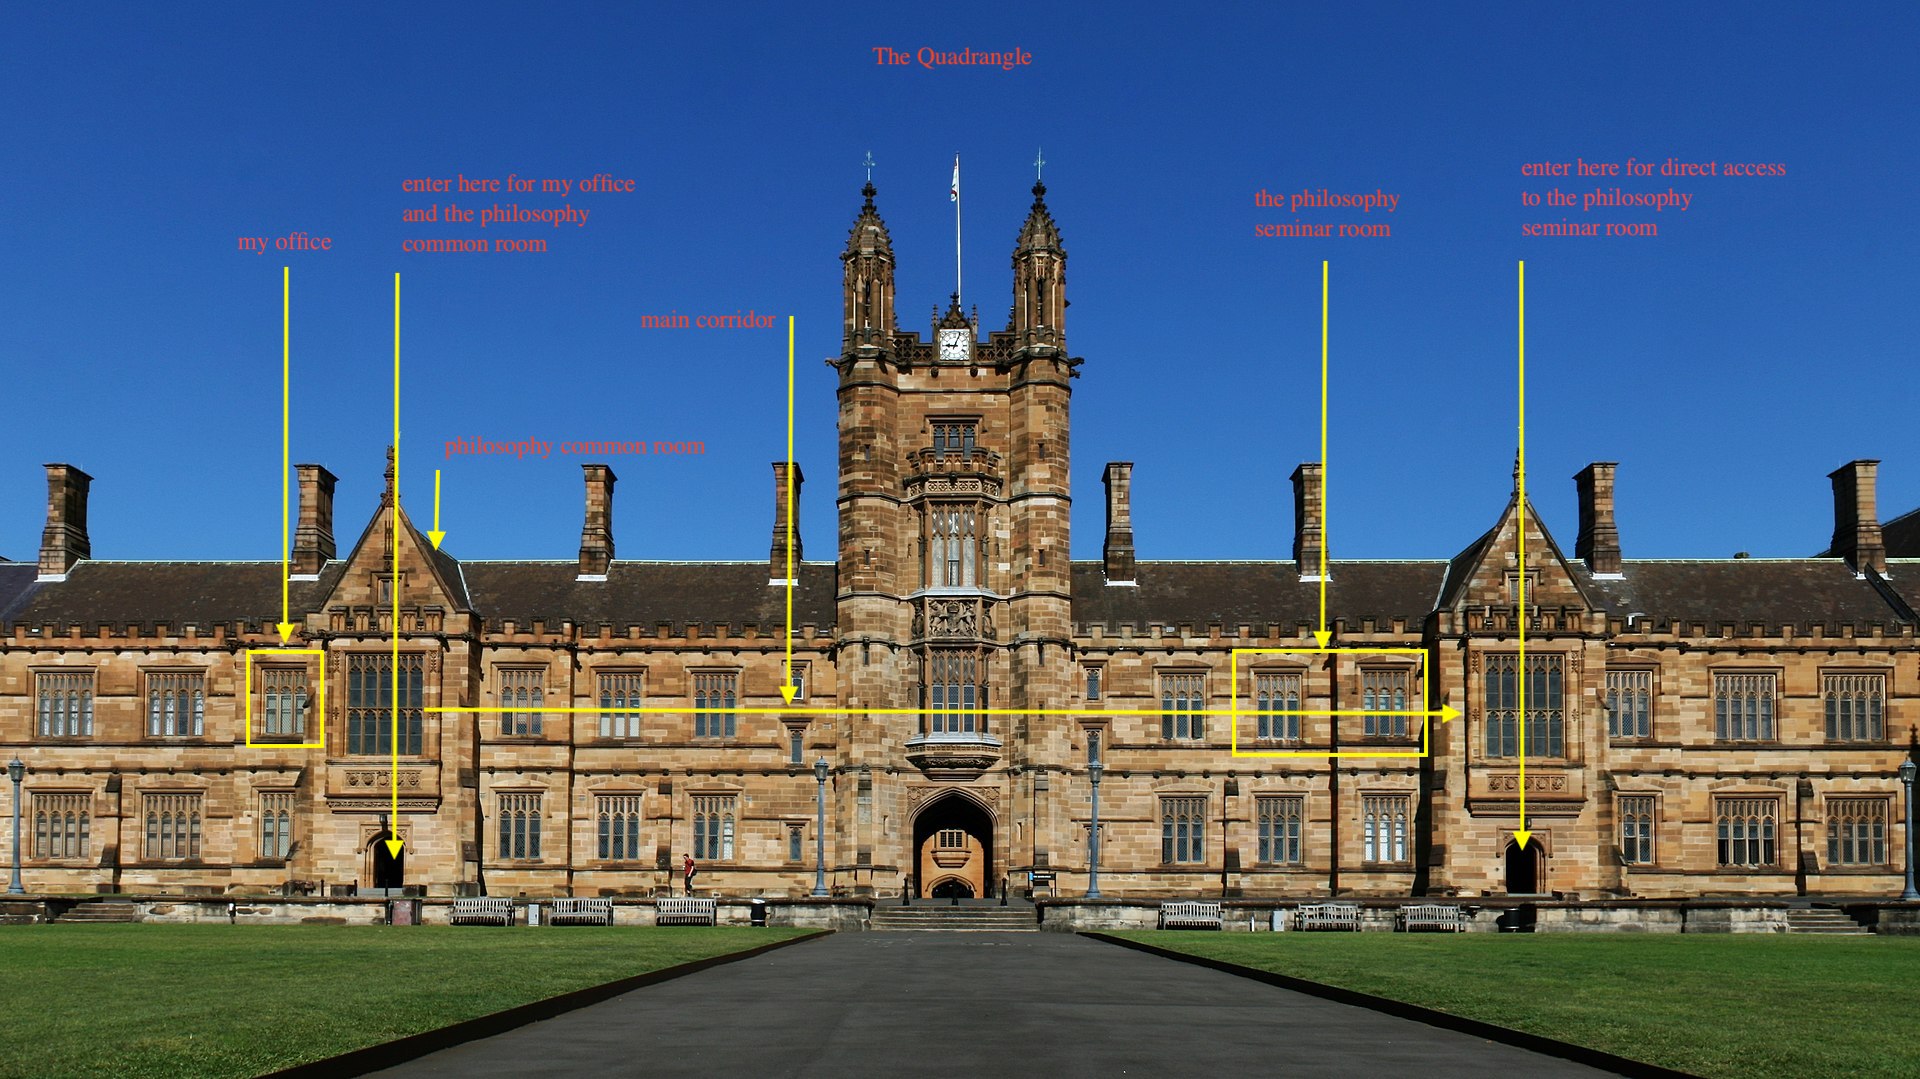 The Quadrangle: open image in a new tab to view full size